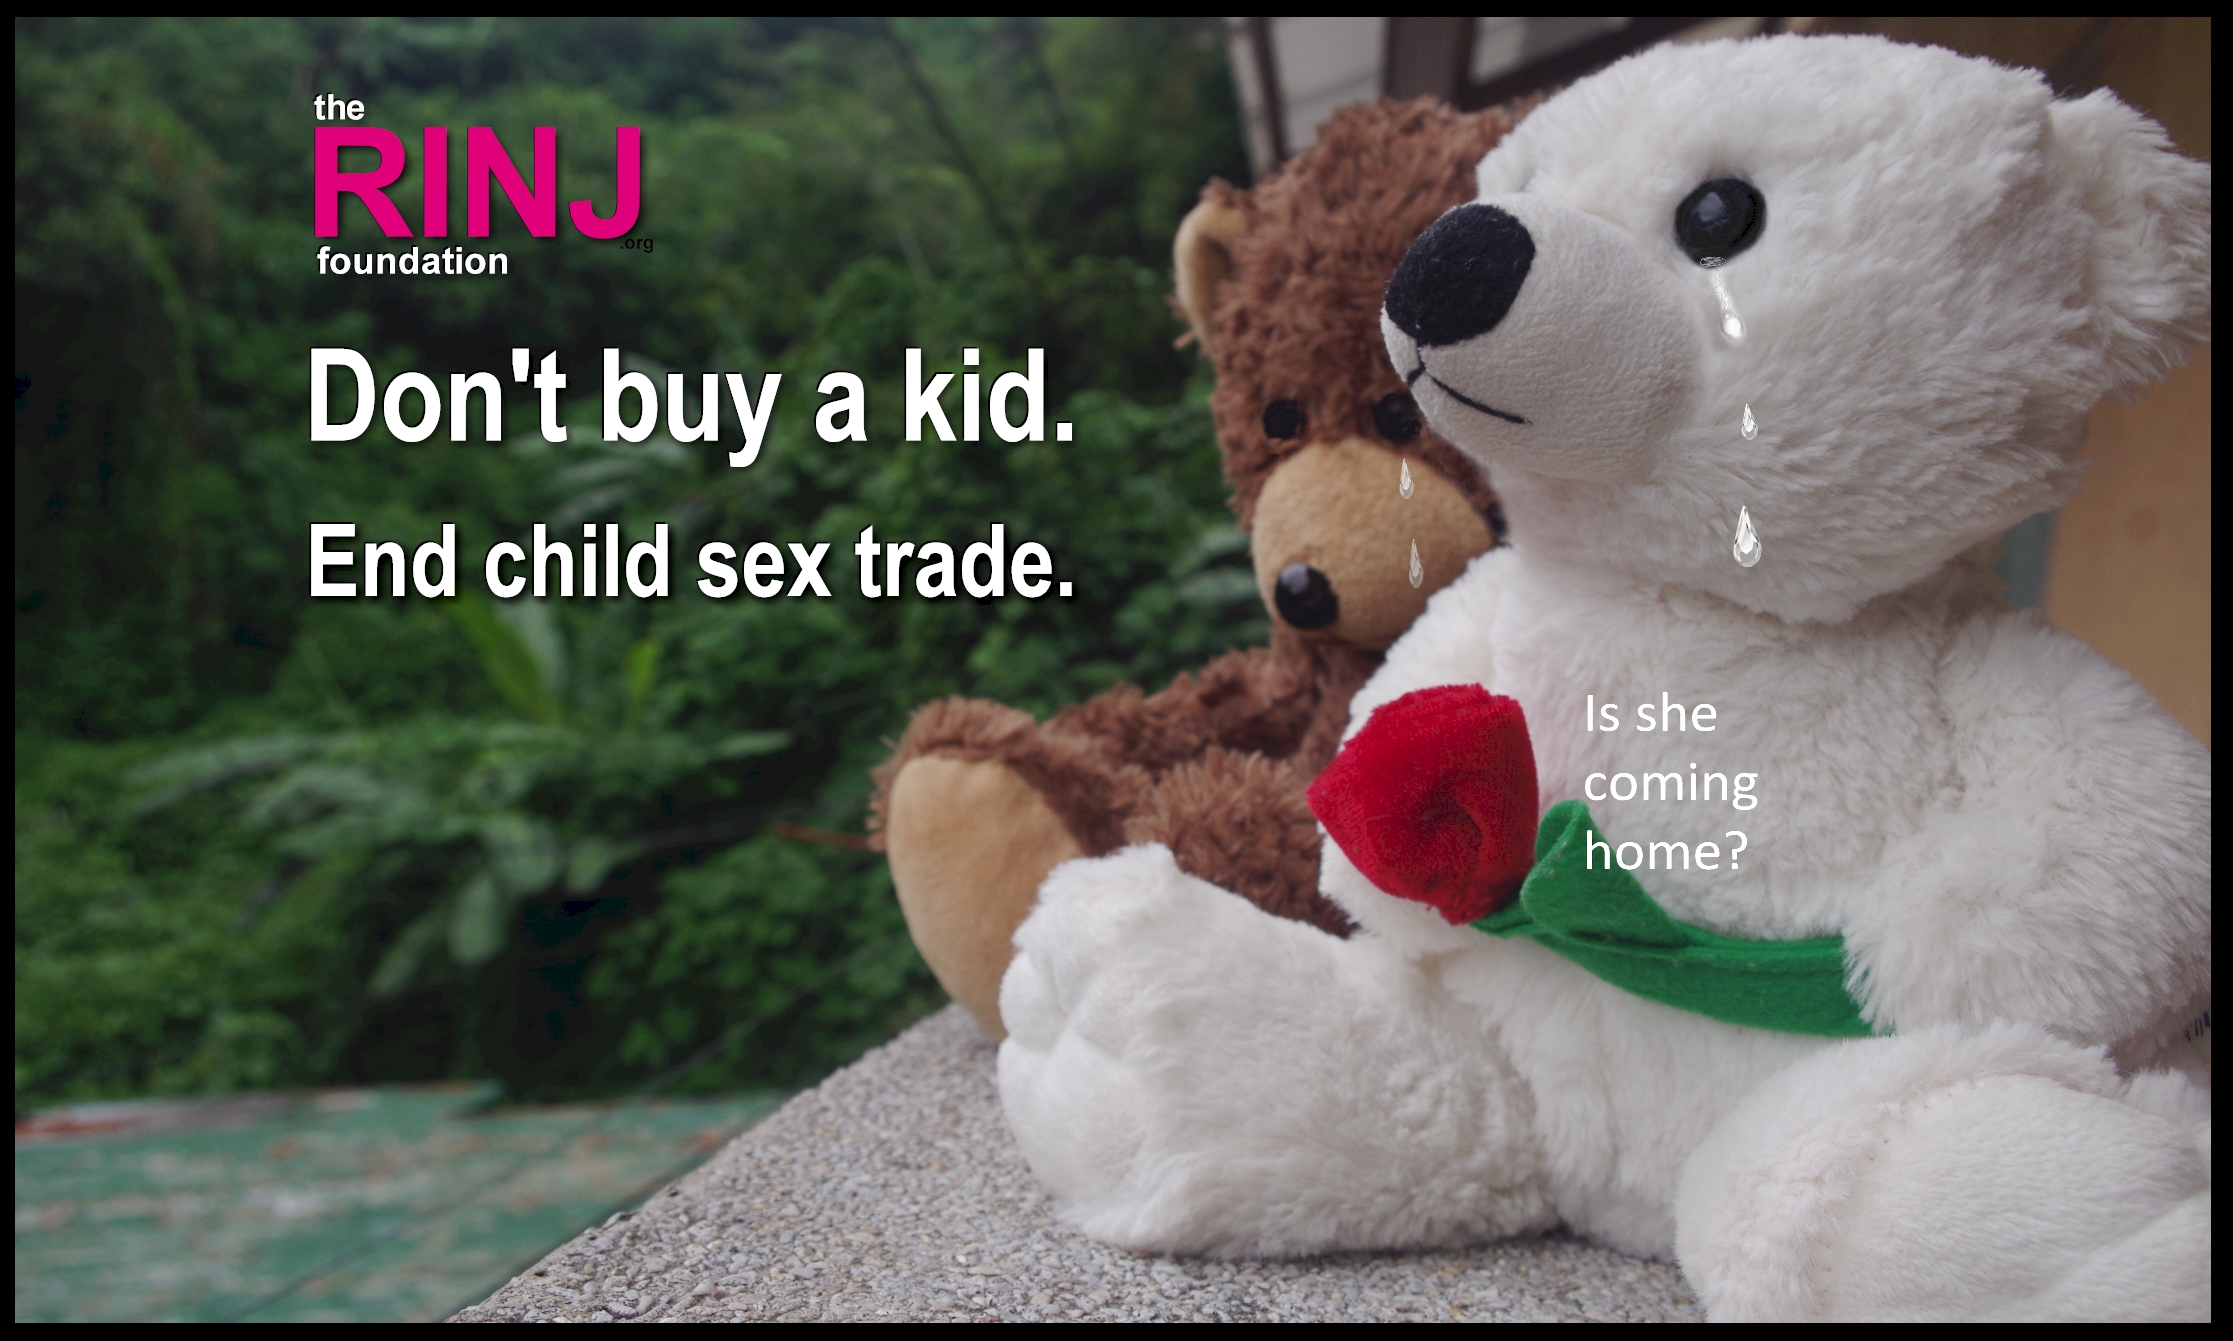 Don't buy a kid. End child sex trade. @rapeisnojoke 2016 - 4th Annual Campaign #DontBuyAKid